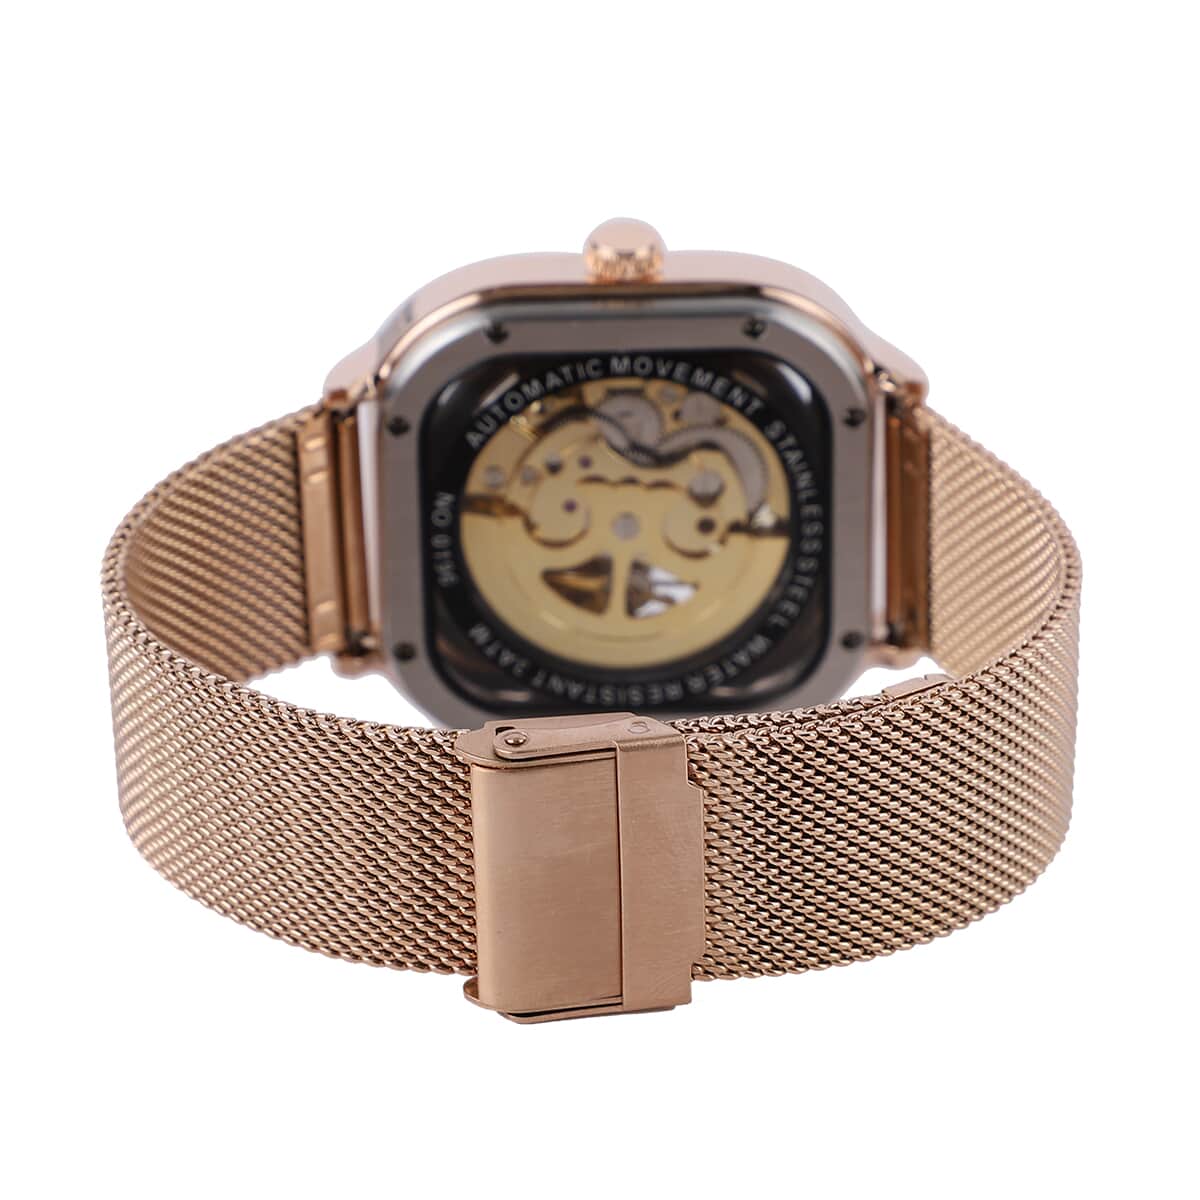 Genoa Automatic Mechanical Movement Watch with ION Plated RG Stainless Steel Mesh Strap (42mm) image number 5